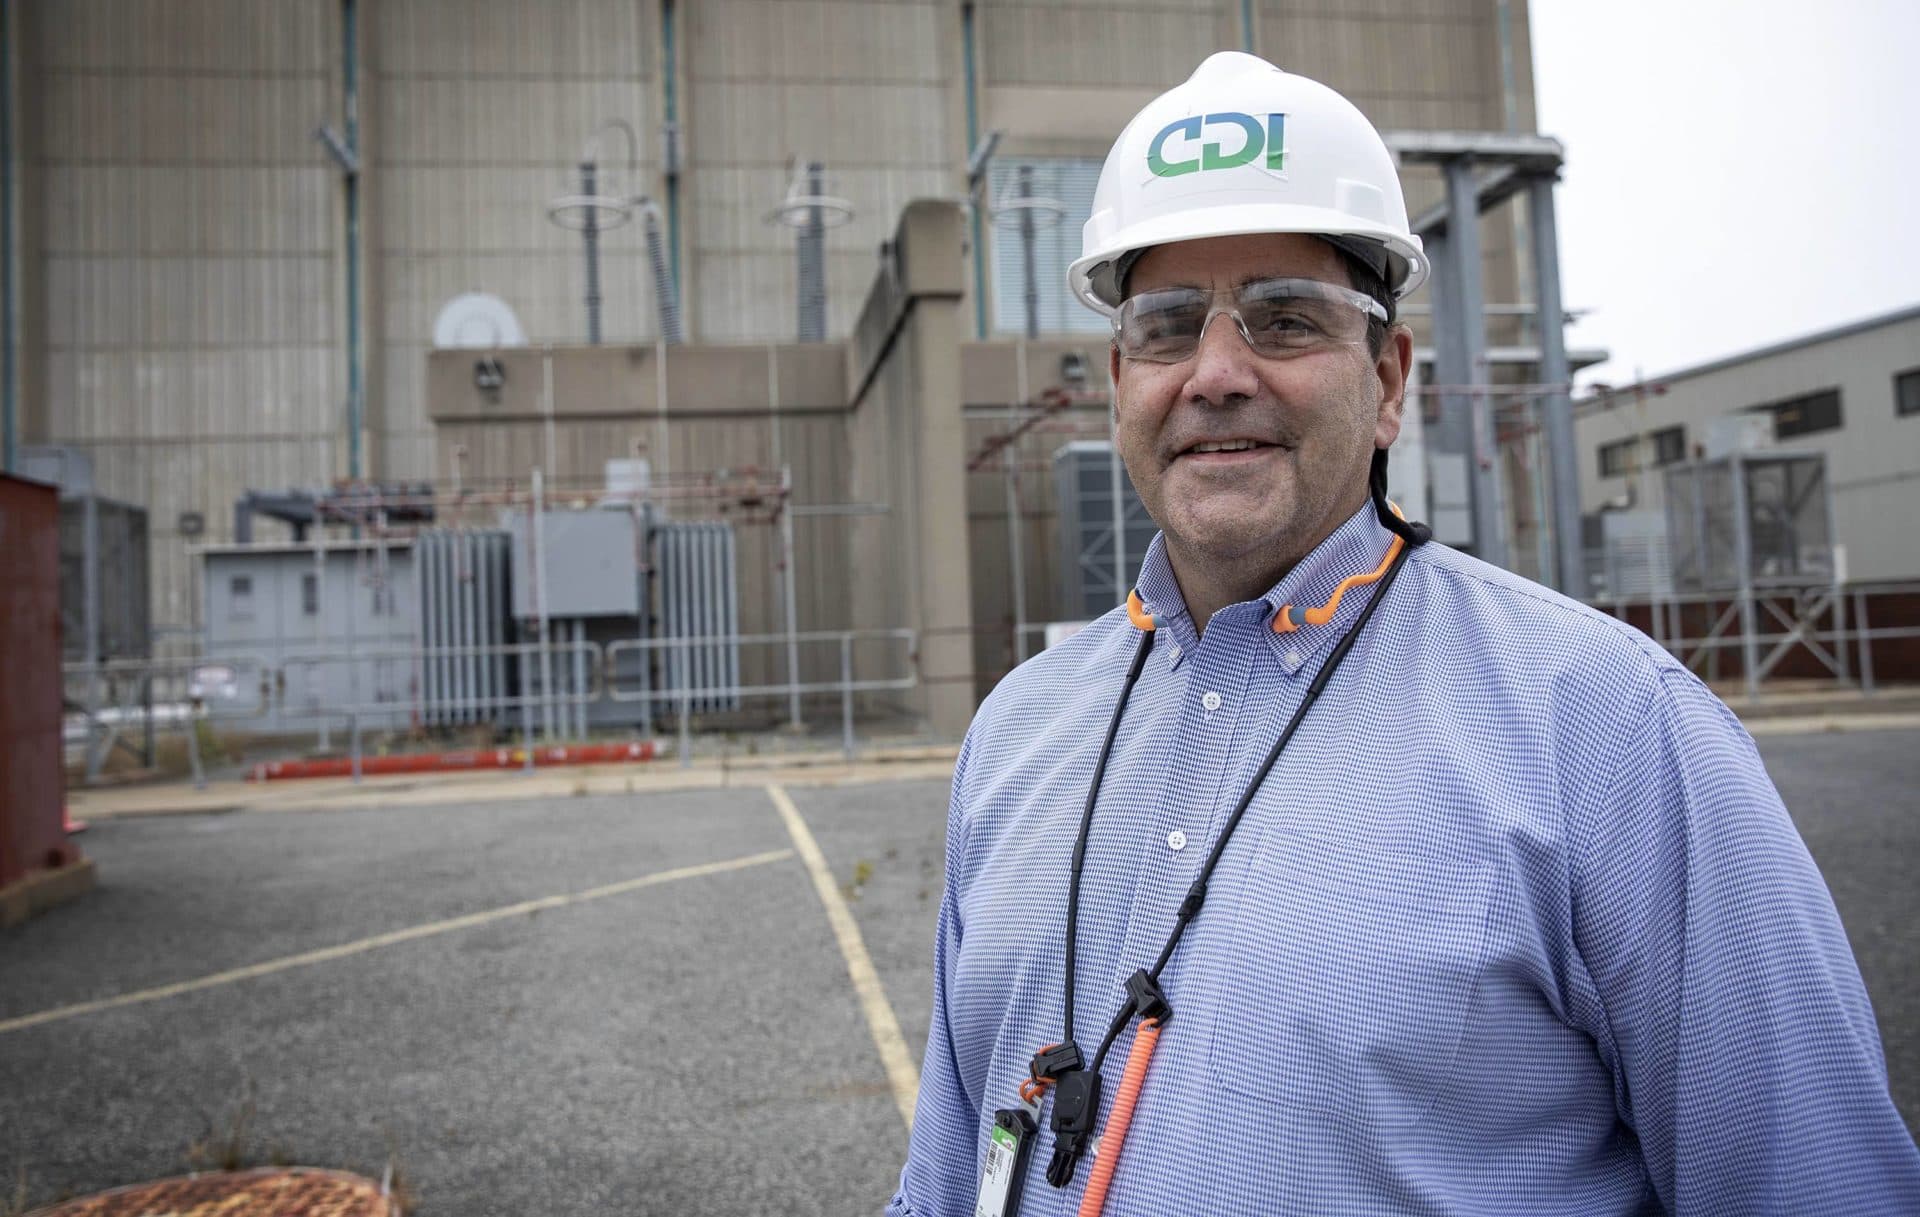 Decommissioning compliance manager Dave Noyes by the reactor building at the Pilgrim nuclear power plant. (Robin Lubbock/WBUR)